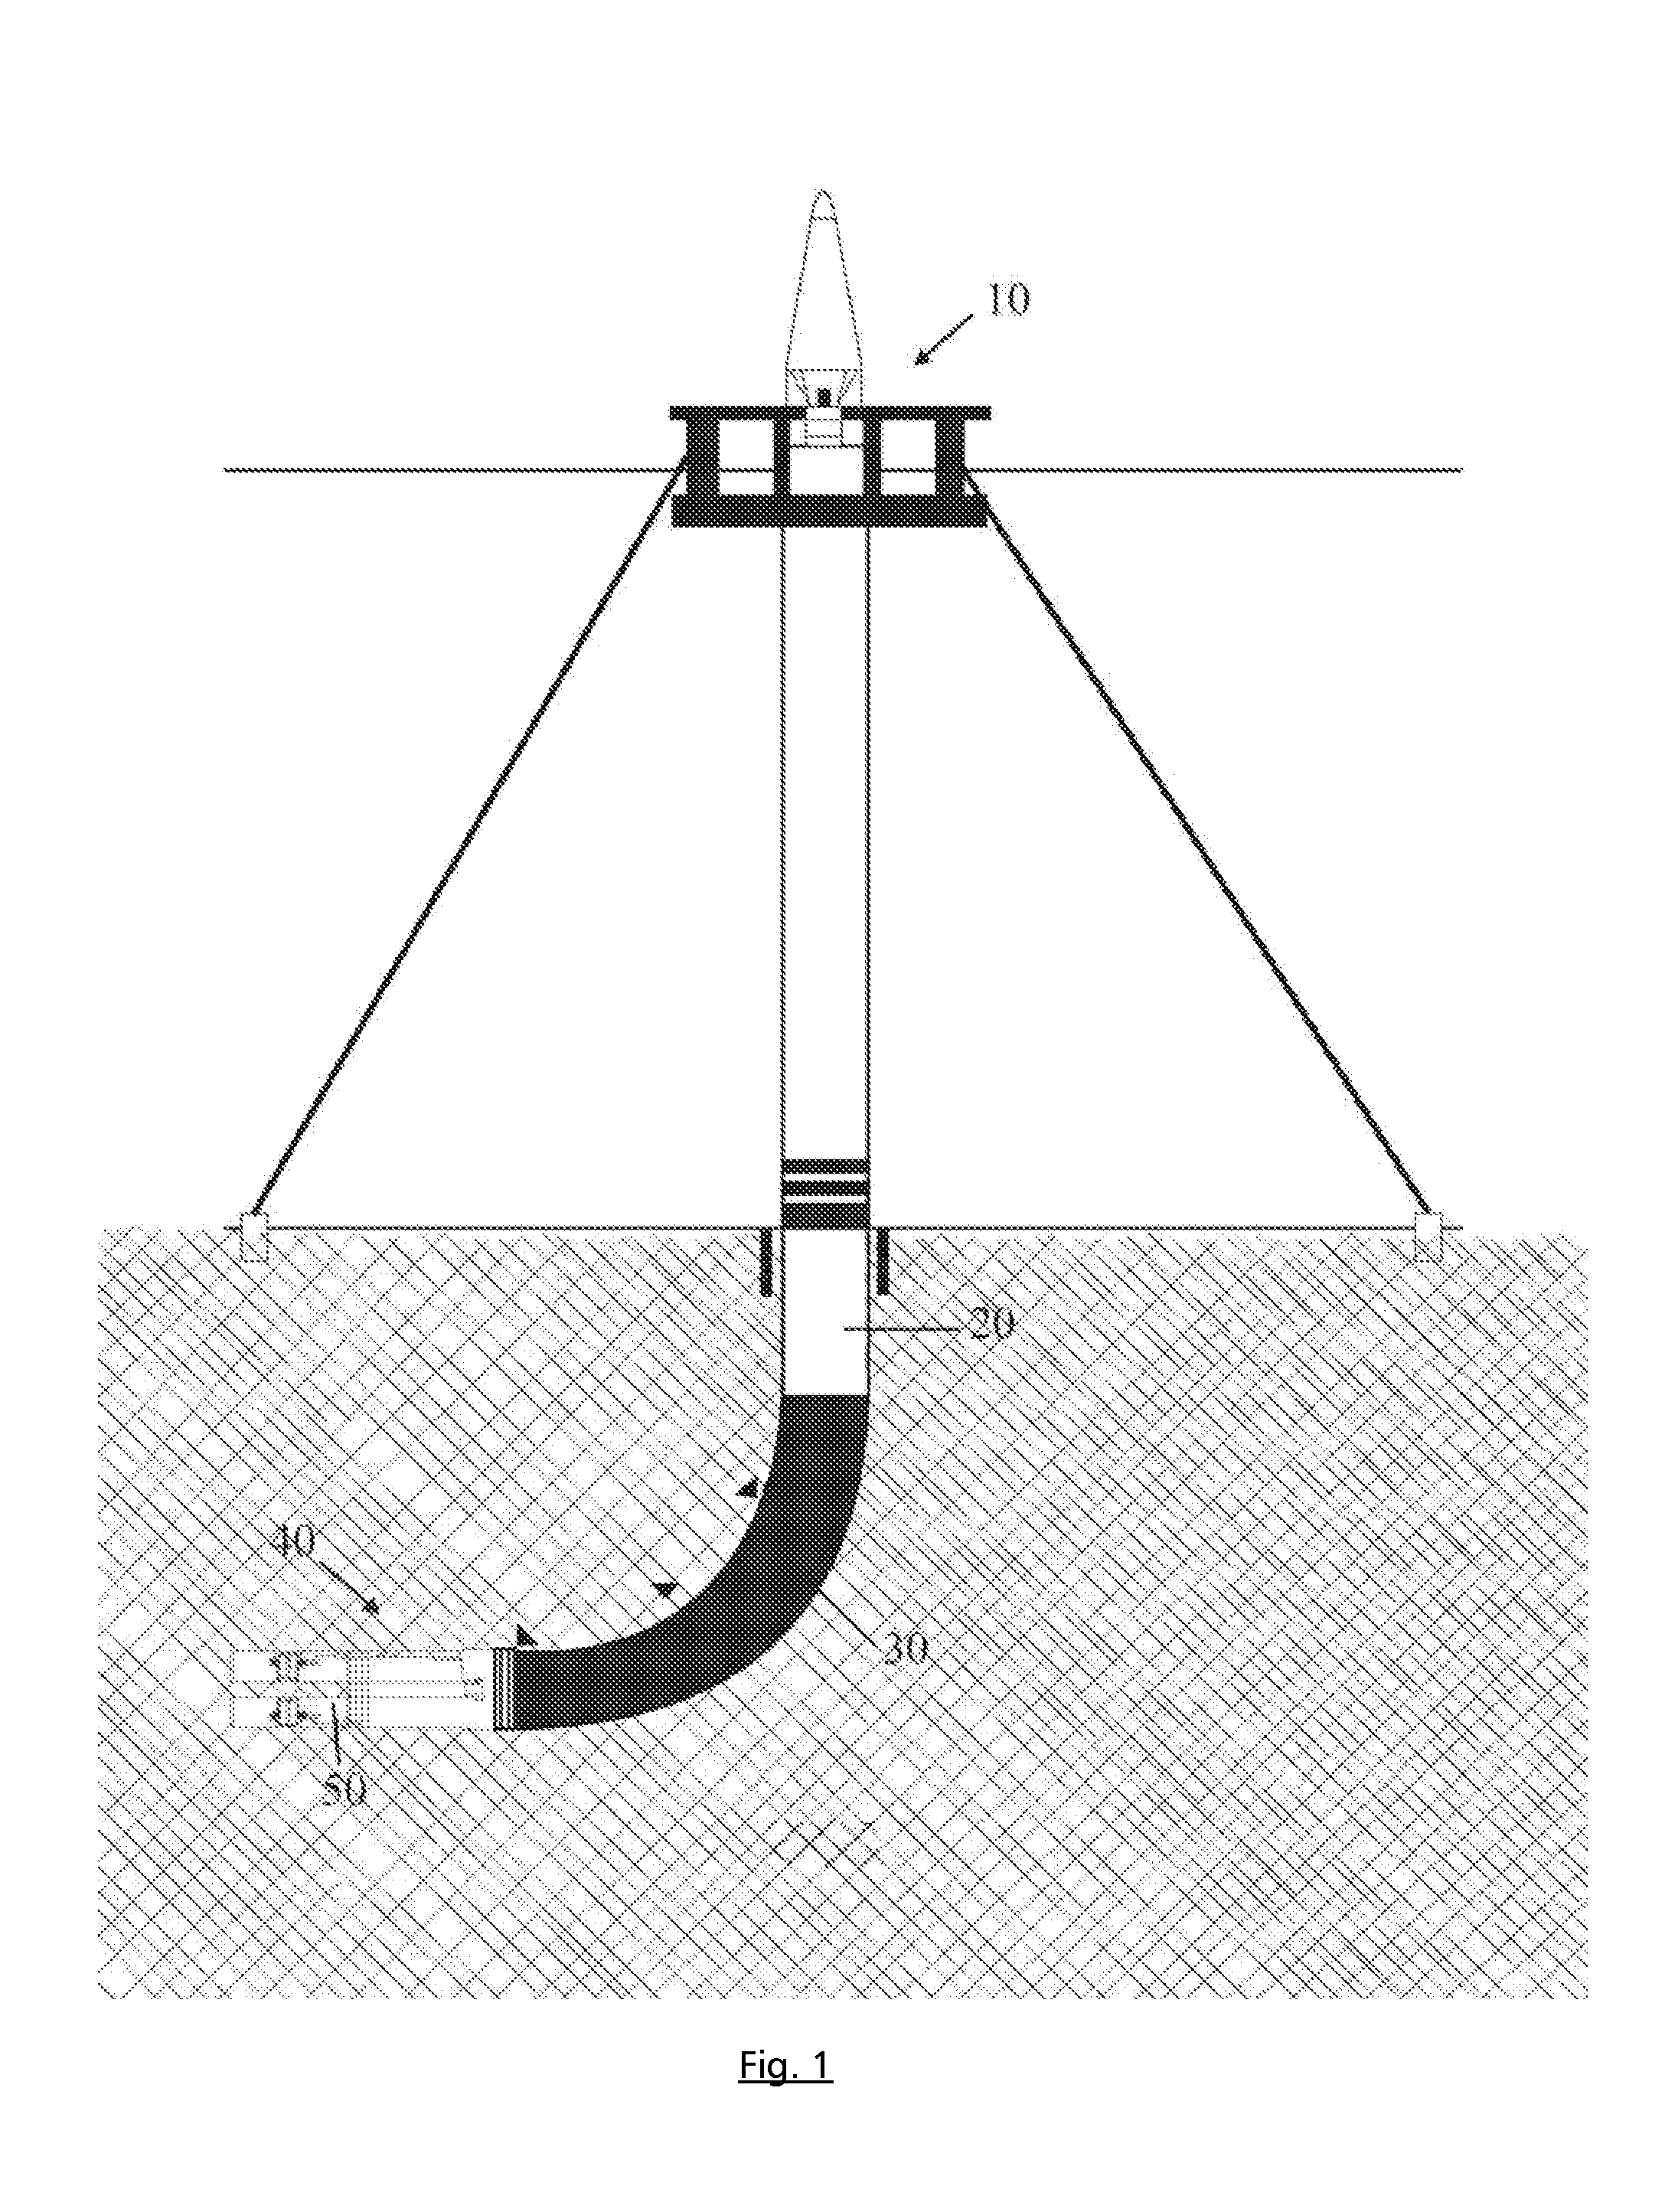 Expansion and sensing tool